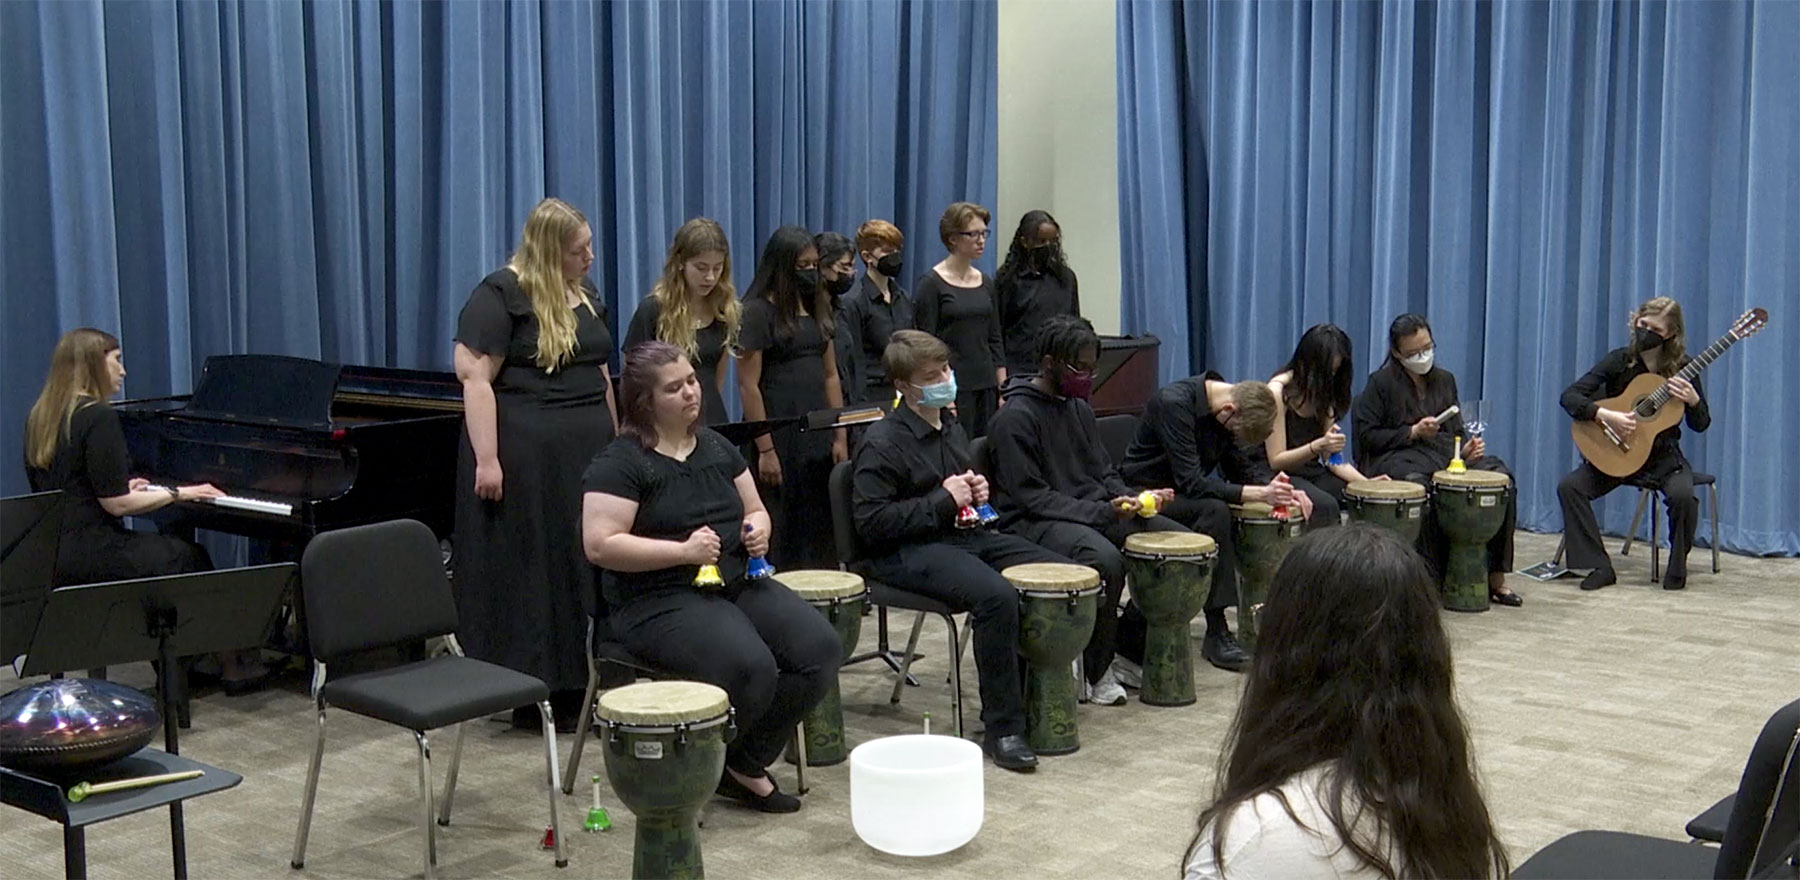 Spring 2022 Healing Arts Ensemble Recital featuring original compositions by Rita Gigliotti. Instruments being used are crystal bowls, HAPI drums, djembe, handbells, piano, human voice, guitar. 